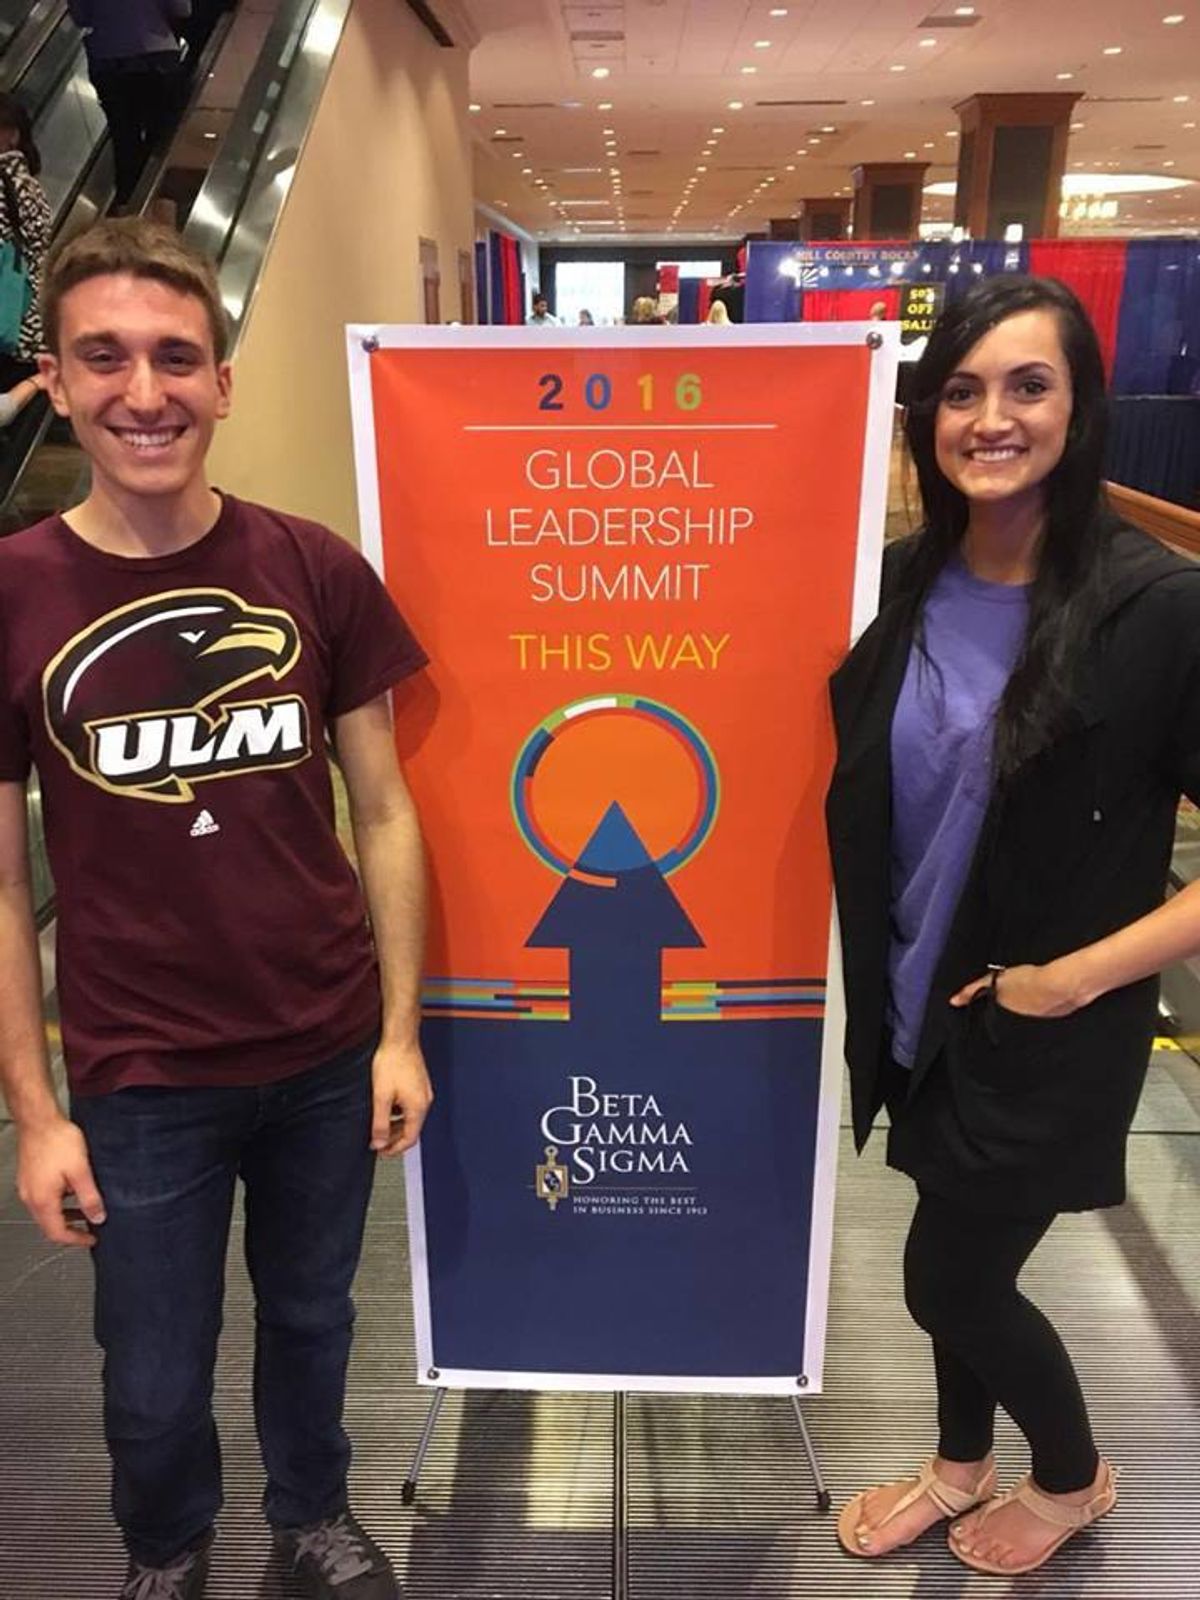 Our Global Leadership Summit Experience